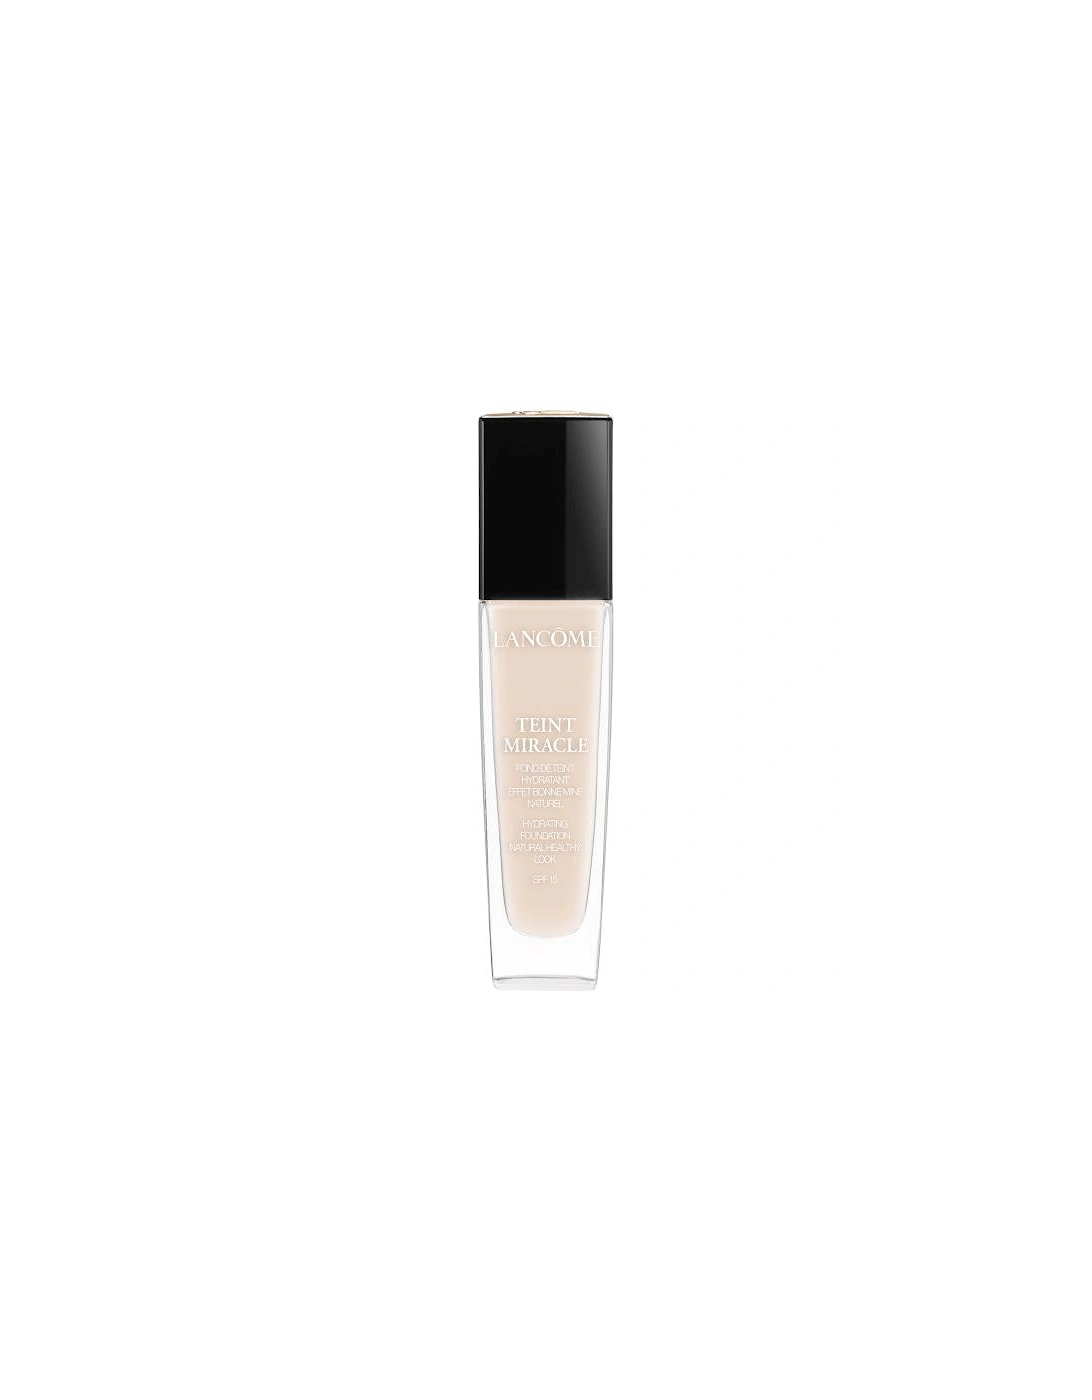 Teint Miracle Foundation SPF15 005 Beige Ivoire, 21 of 20